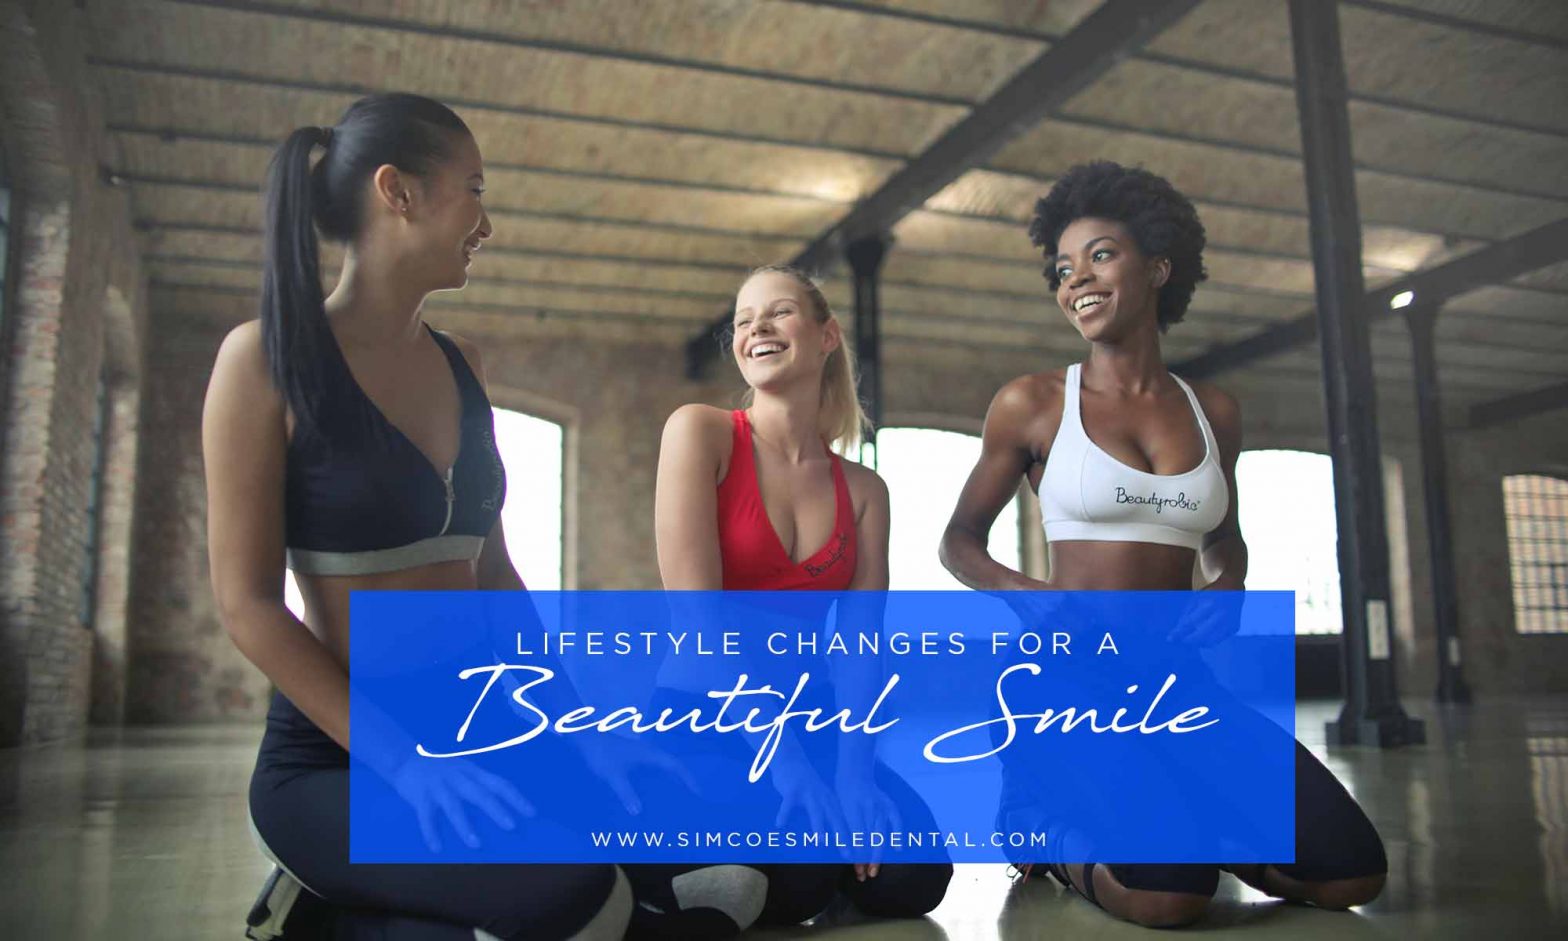 Lifestyle changes for a beautiful smile